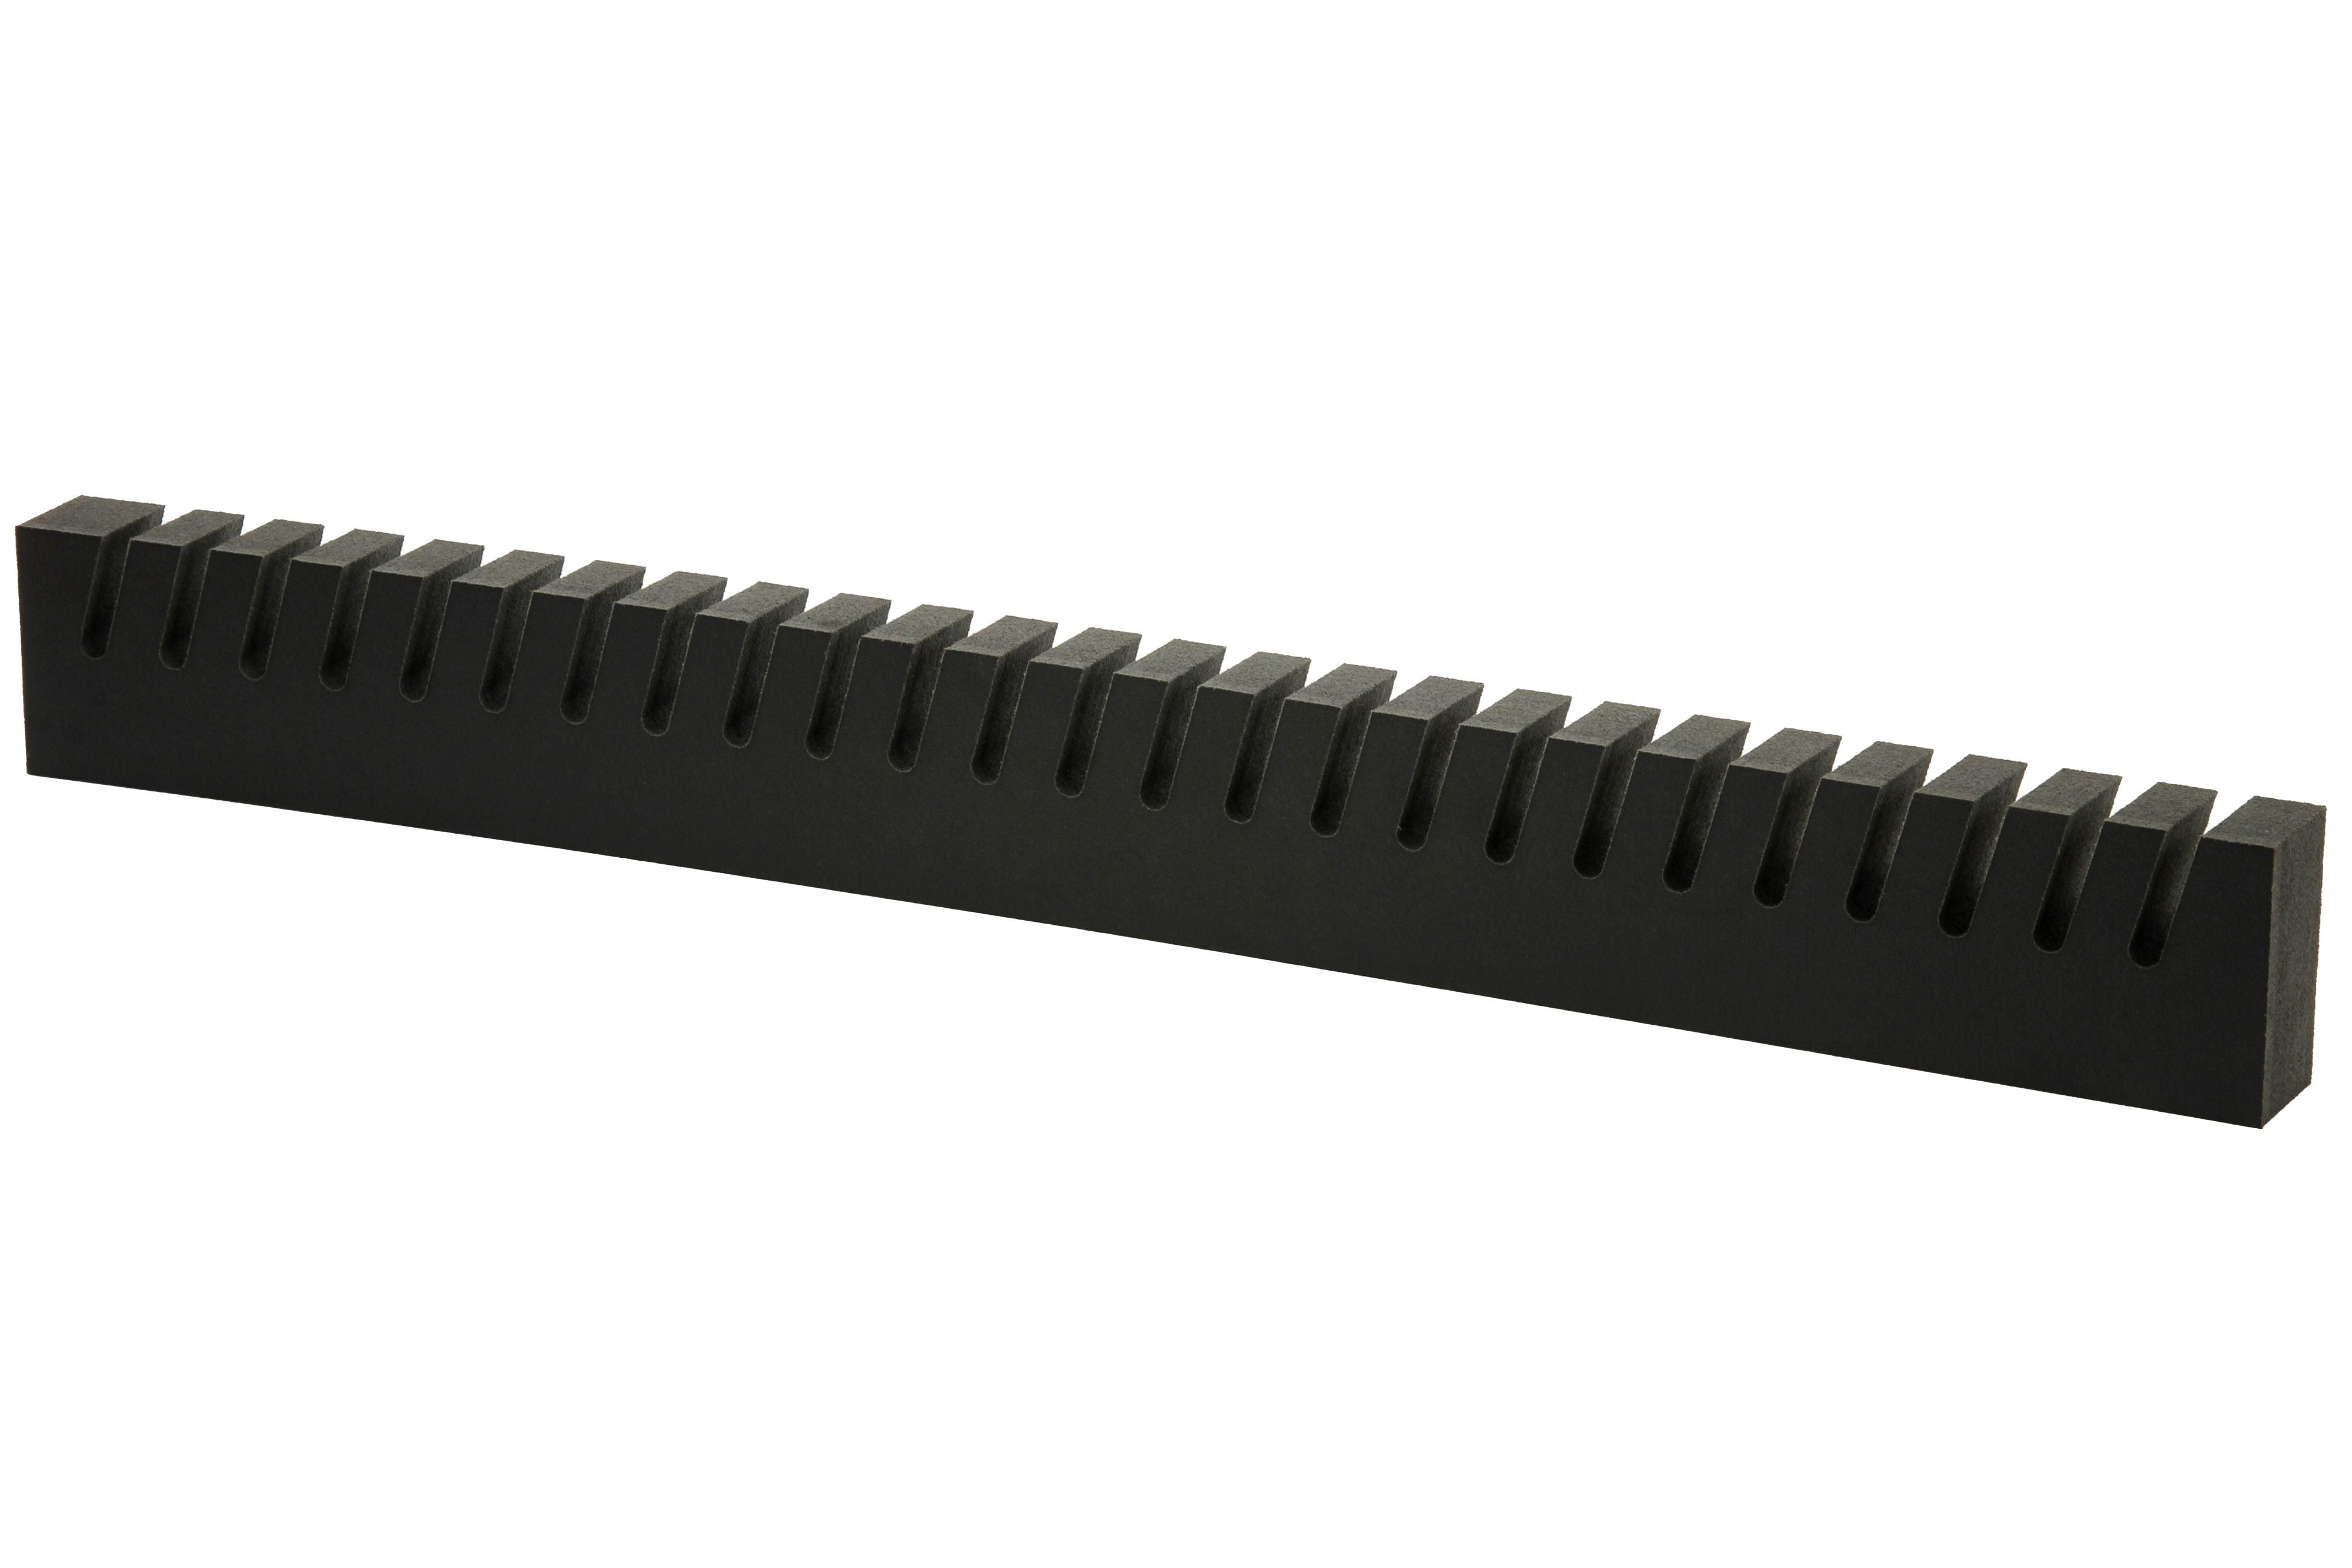 Heavy Duty Foam Dunnage Reusable Cushion for Shipping Box Crate Angled Slot 36x4x2 1 Pack